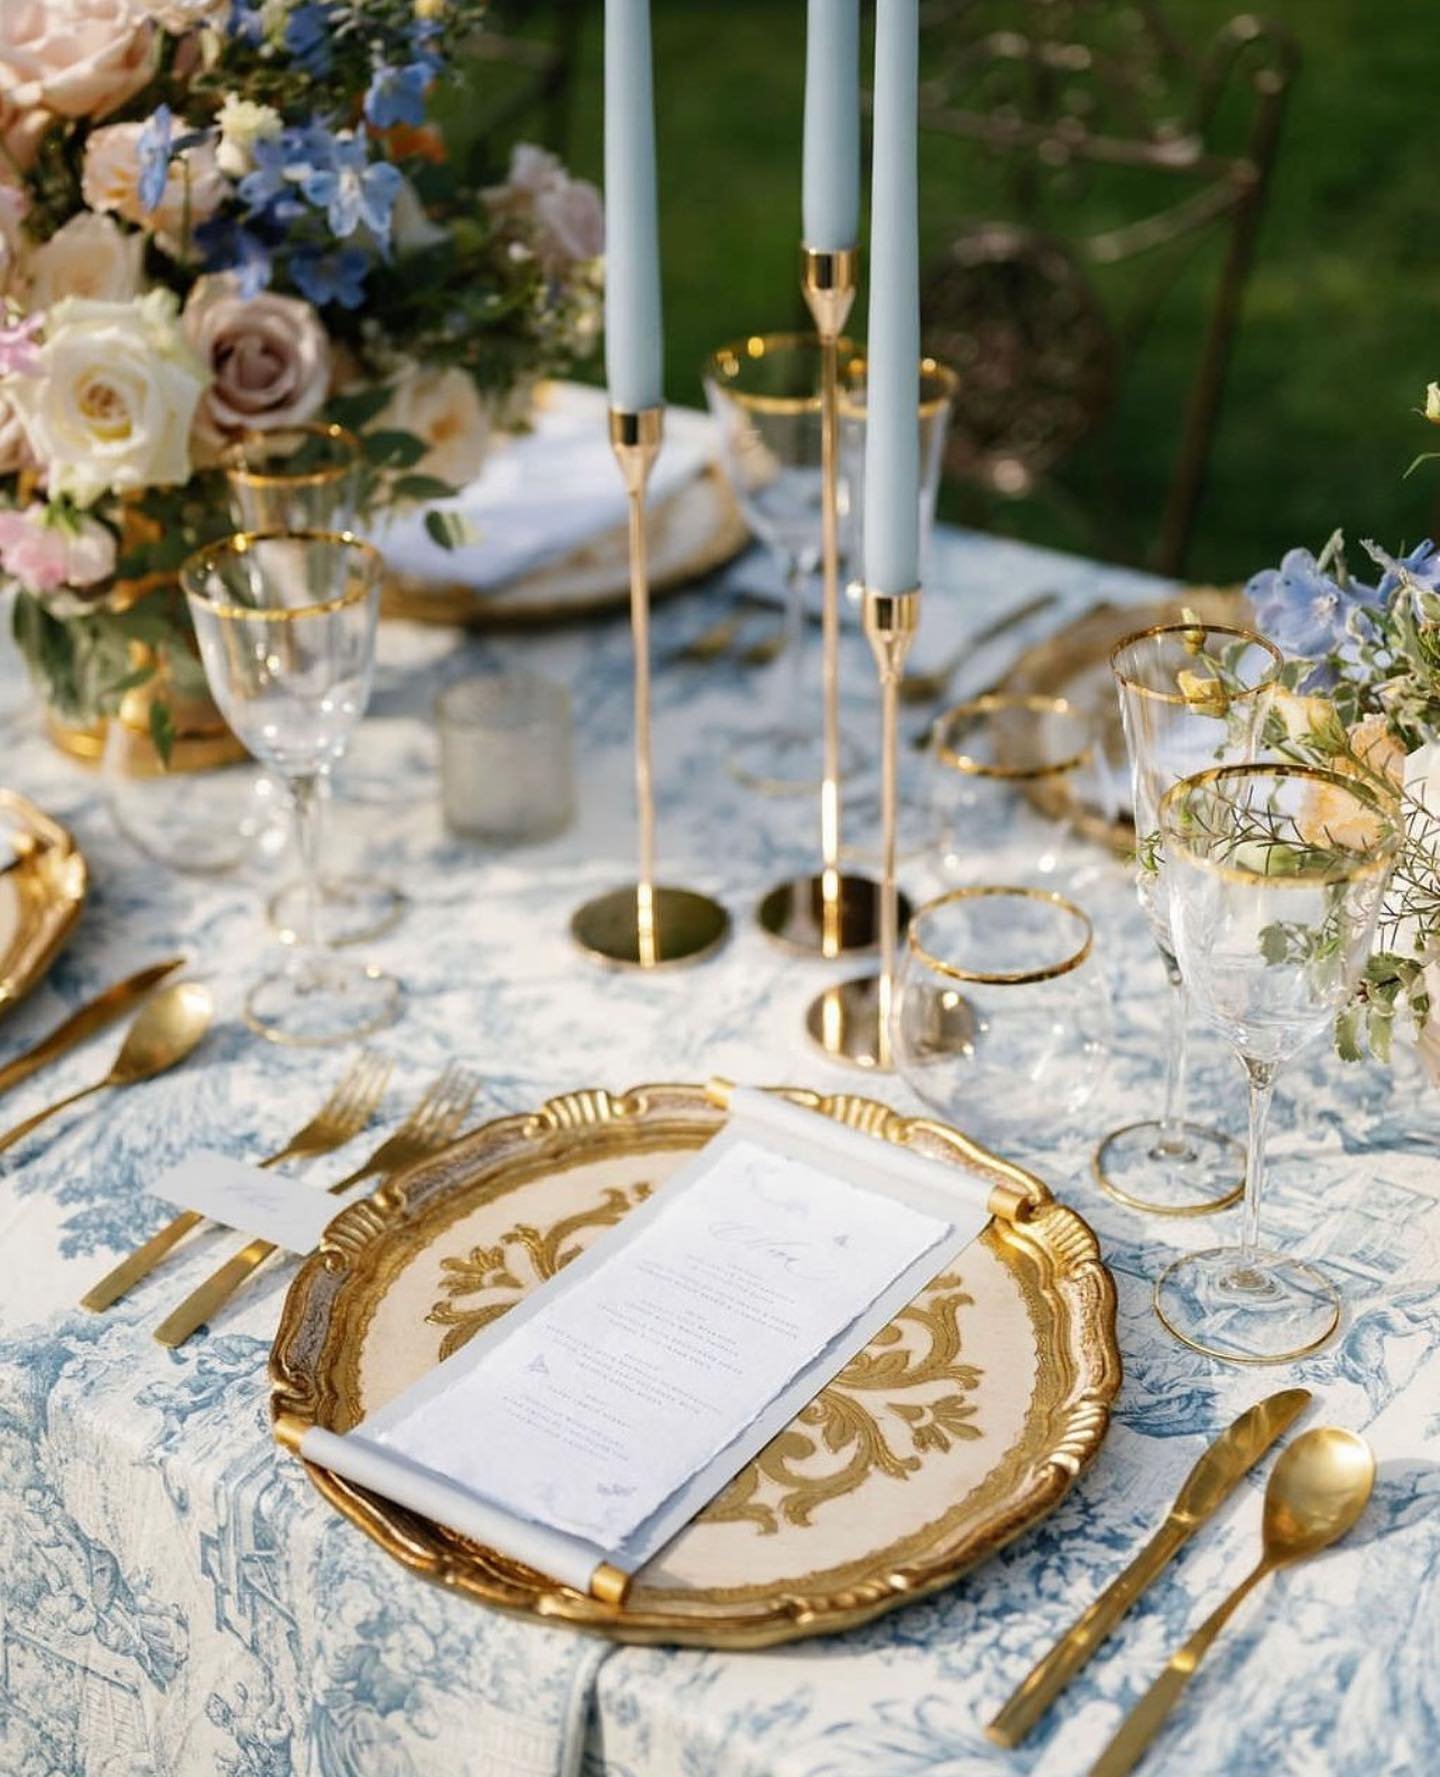 Lost in a dream of beauty and elegance at Villa Balbiano✨ 
.
.
Featured on @ruffledblog 

Planner @envies_deco
Stylist + Stationery @jackiechendesign
Photo @_catherinechuang_
Photo Assistant @sofitorriphotography
Video @panagiotakis_george
HMUA @linm